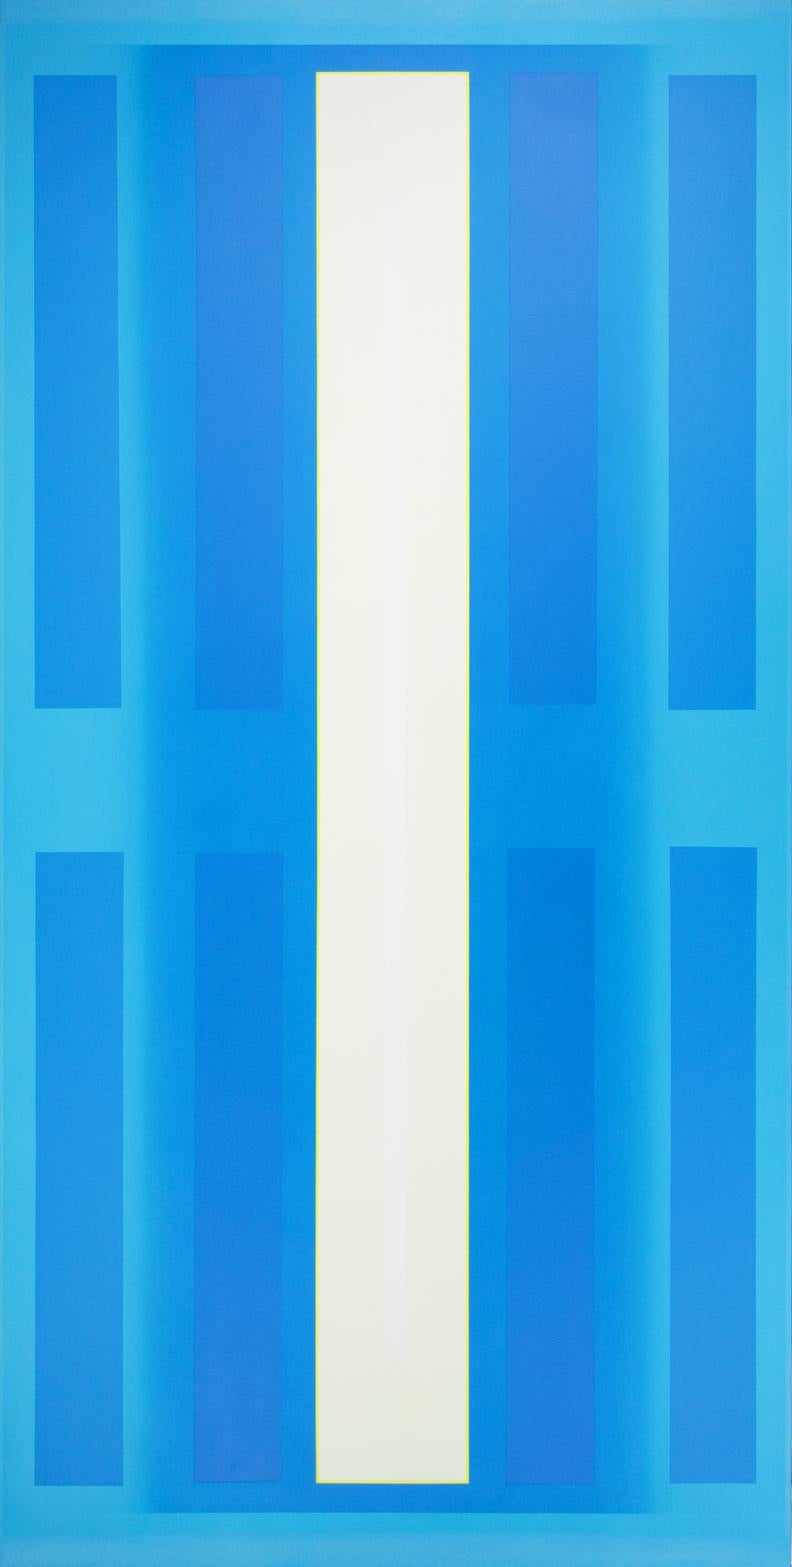 Lucas Blok Abstract Painting - Minimalist Abstract Blue Colorfield Painting - Untitled, 10-15-14